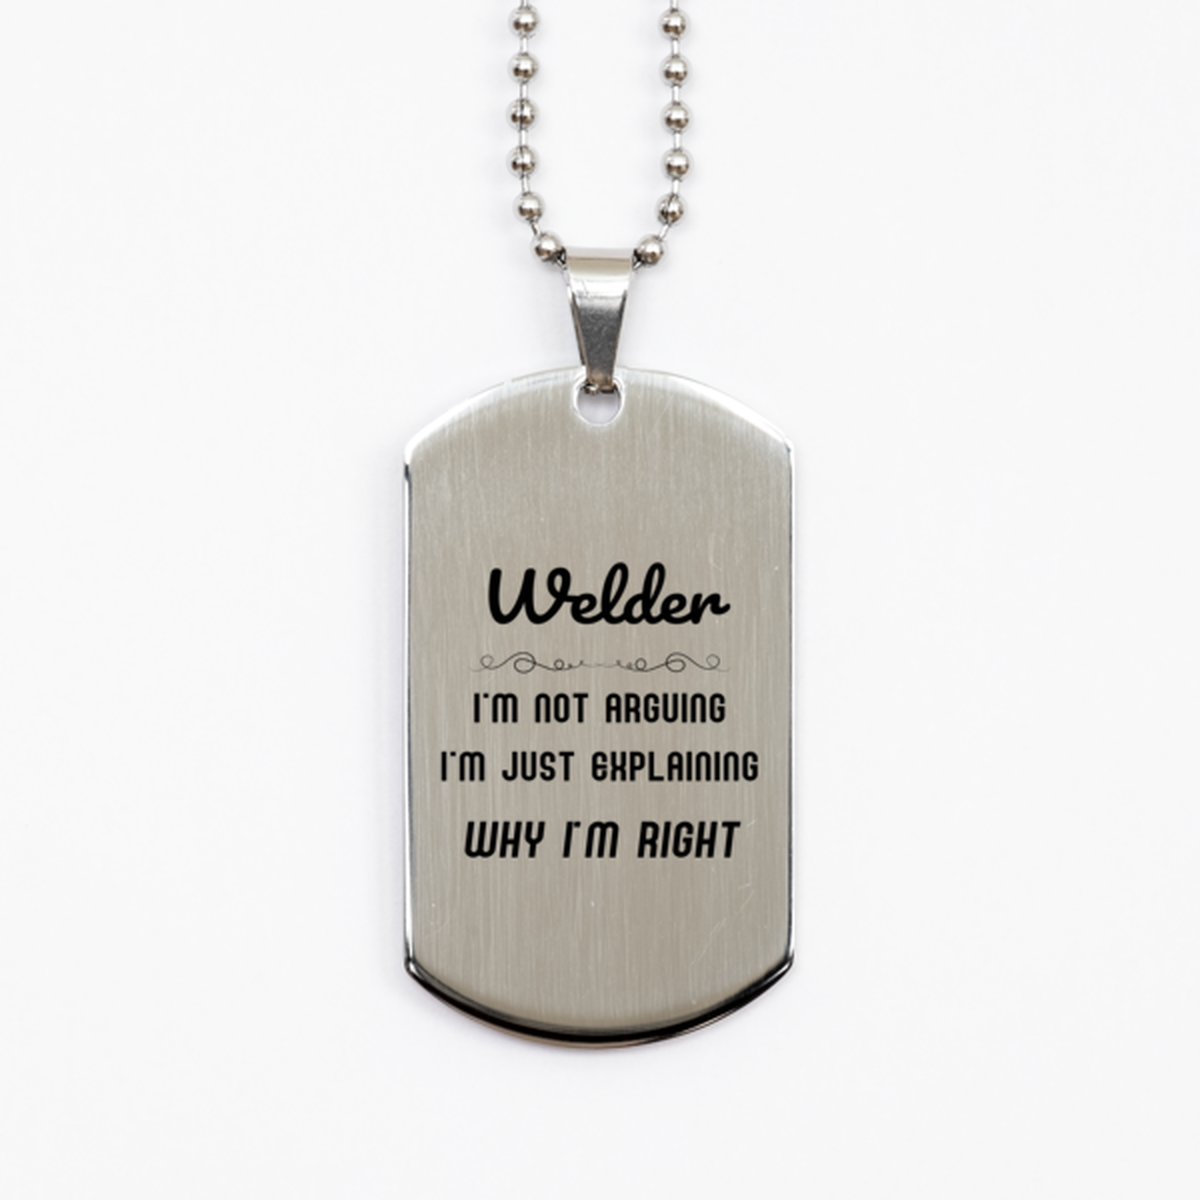 Welder I'm not Arguing. I'm Just Explaining Why I'm RIGHT Silver Dog Tag, Funny Saying Quote Welder Gifts For Welder Graduation Birthday Christmas Gifts for Men Women Coworker